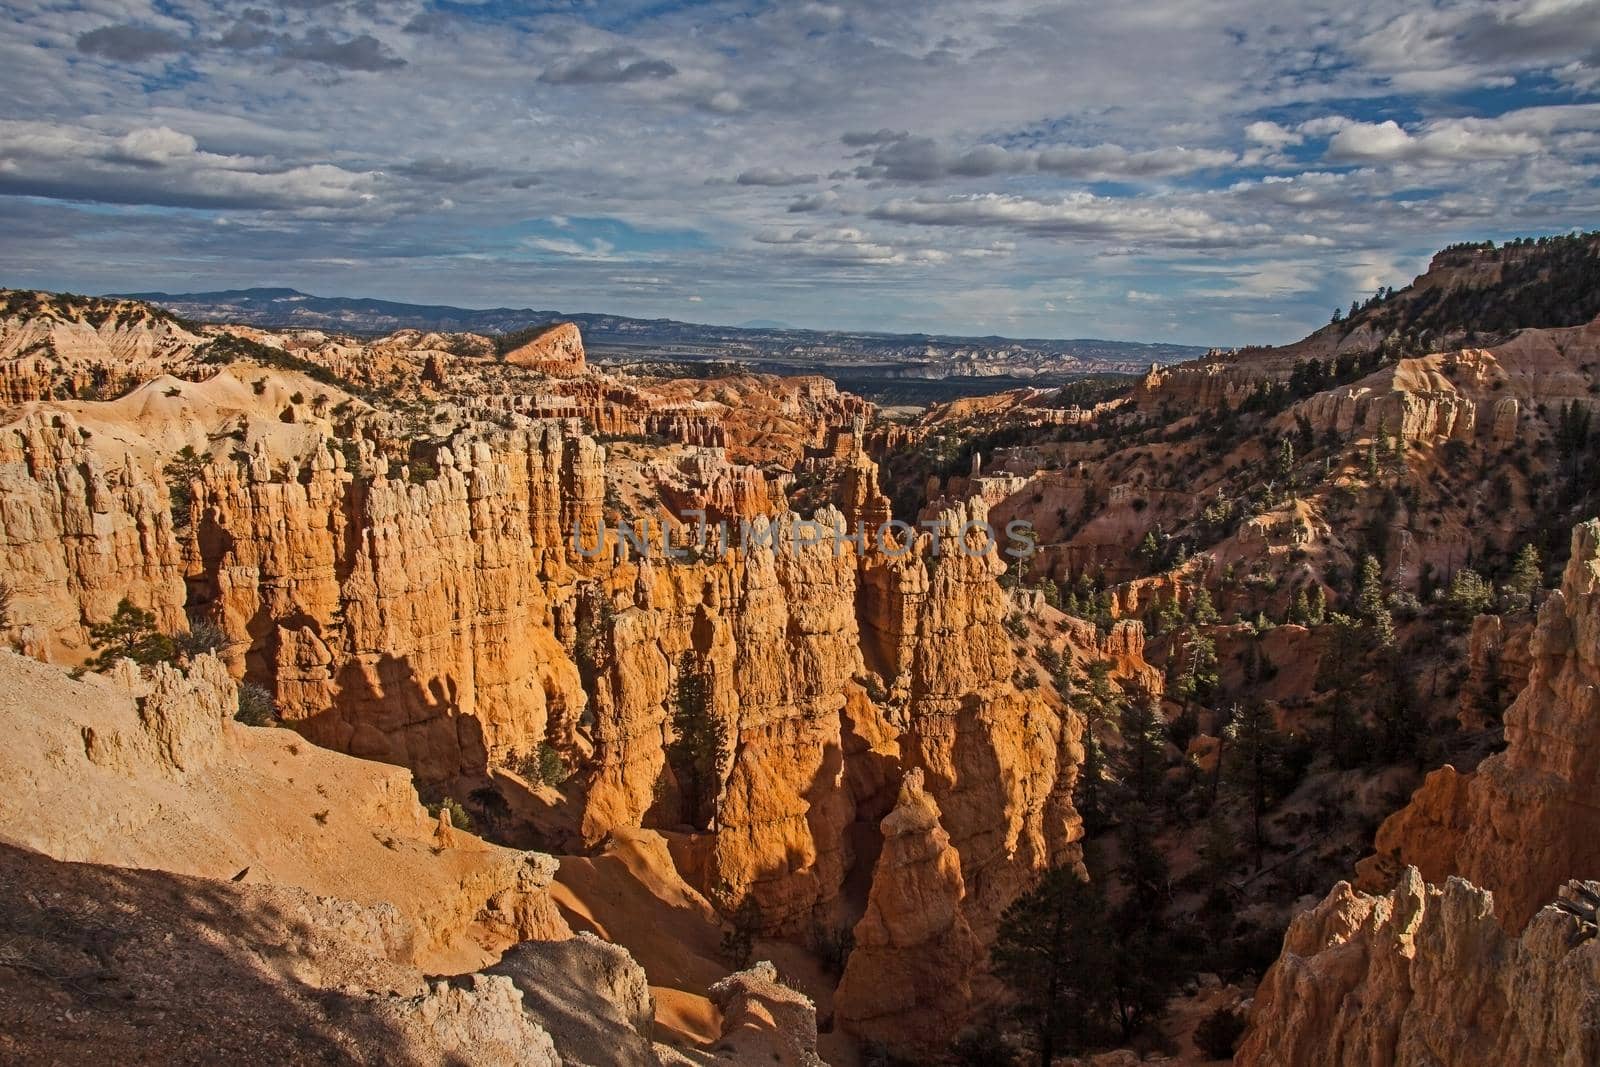 View from the Paria Viewpoint in Bryce Canyon National Park. Utah.USA